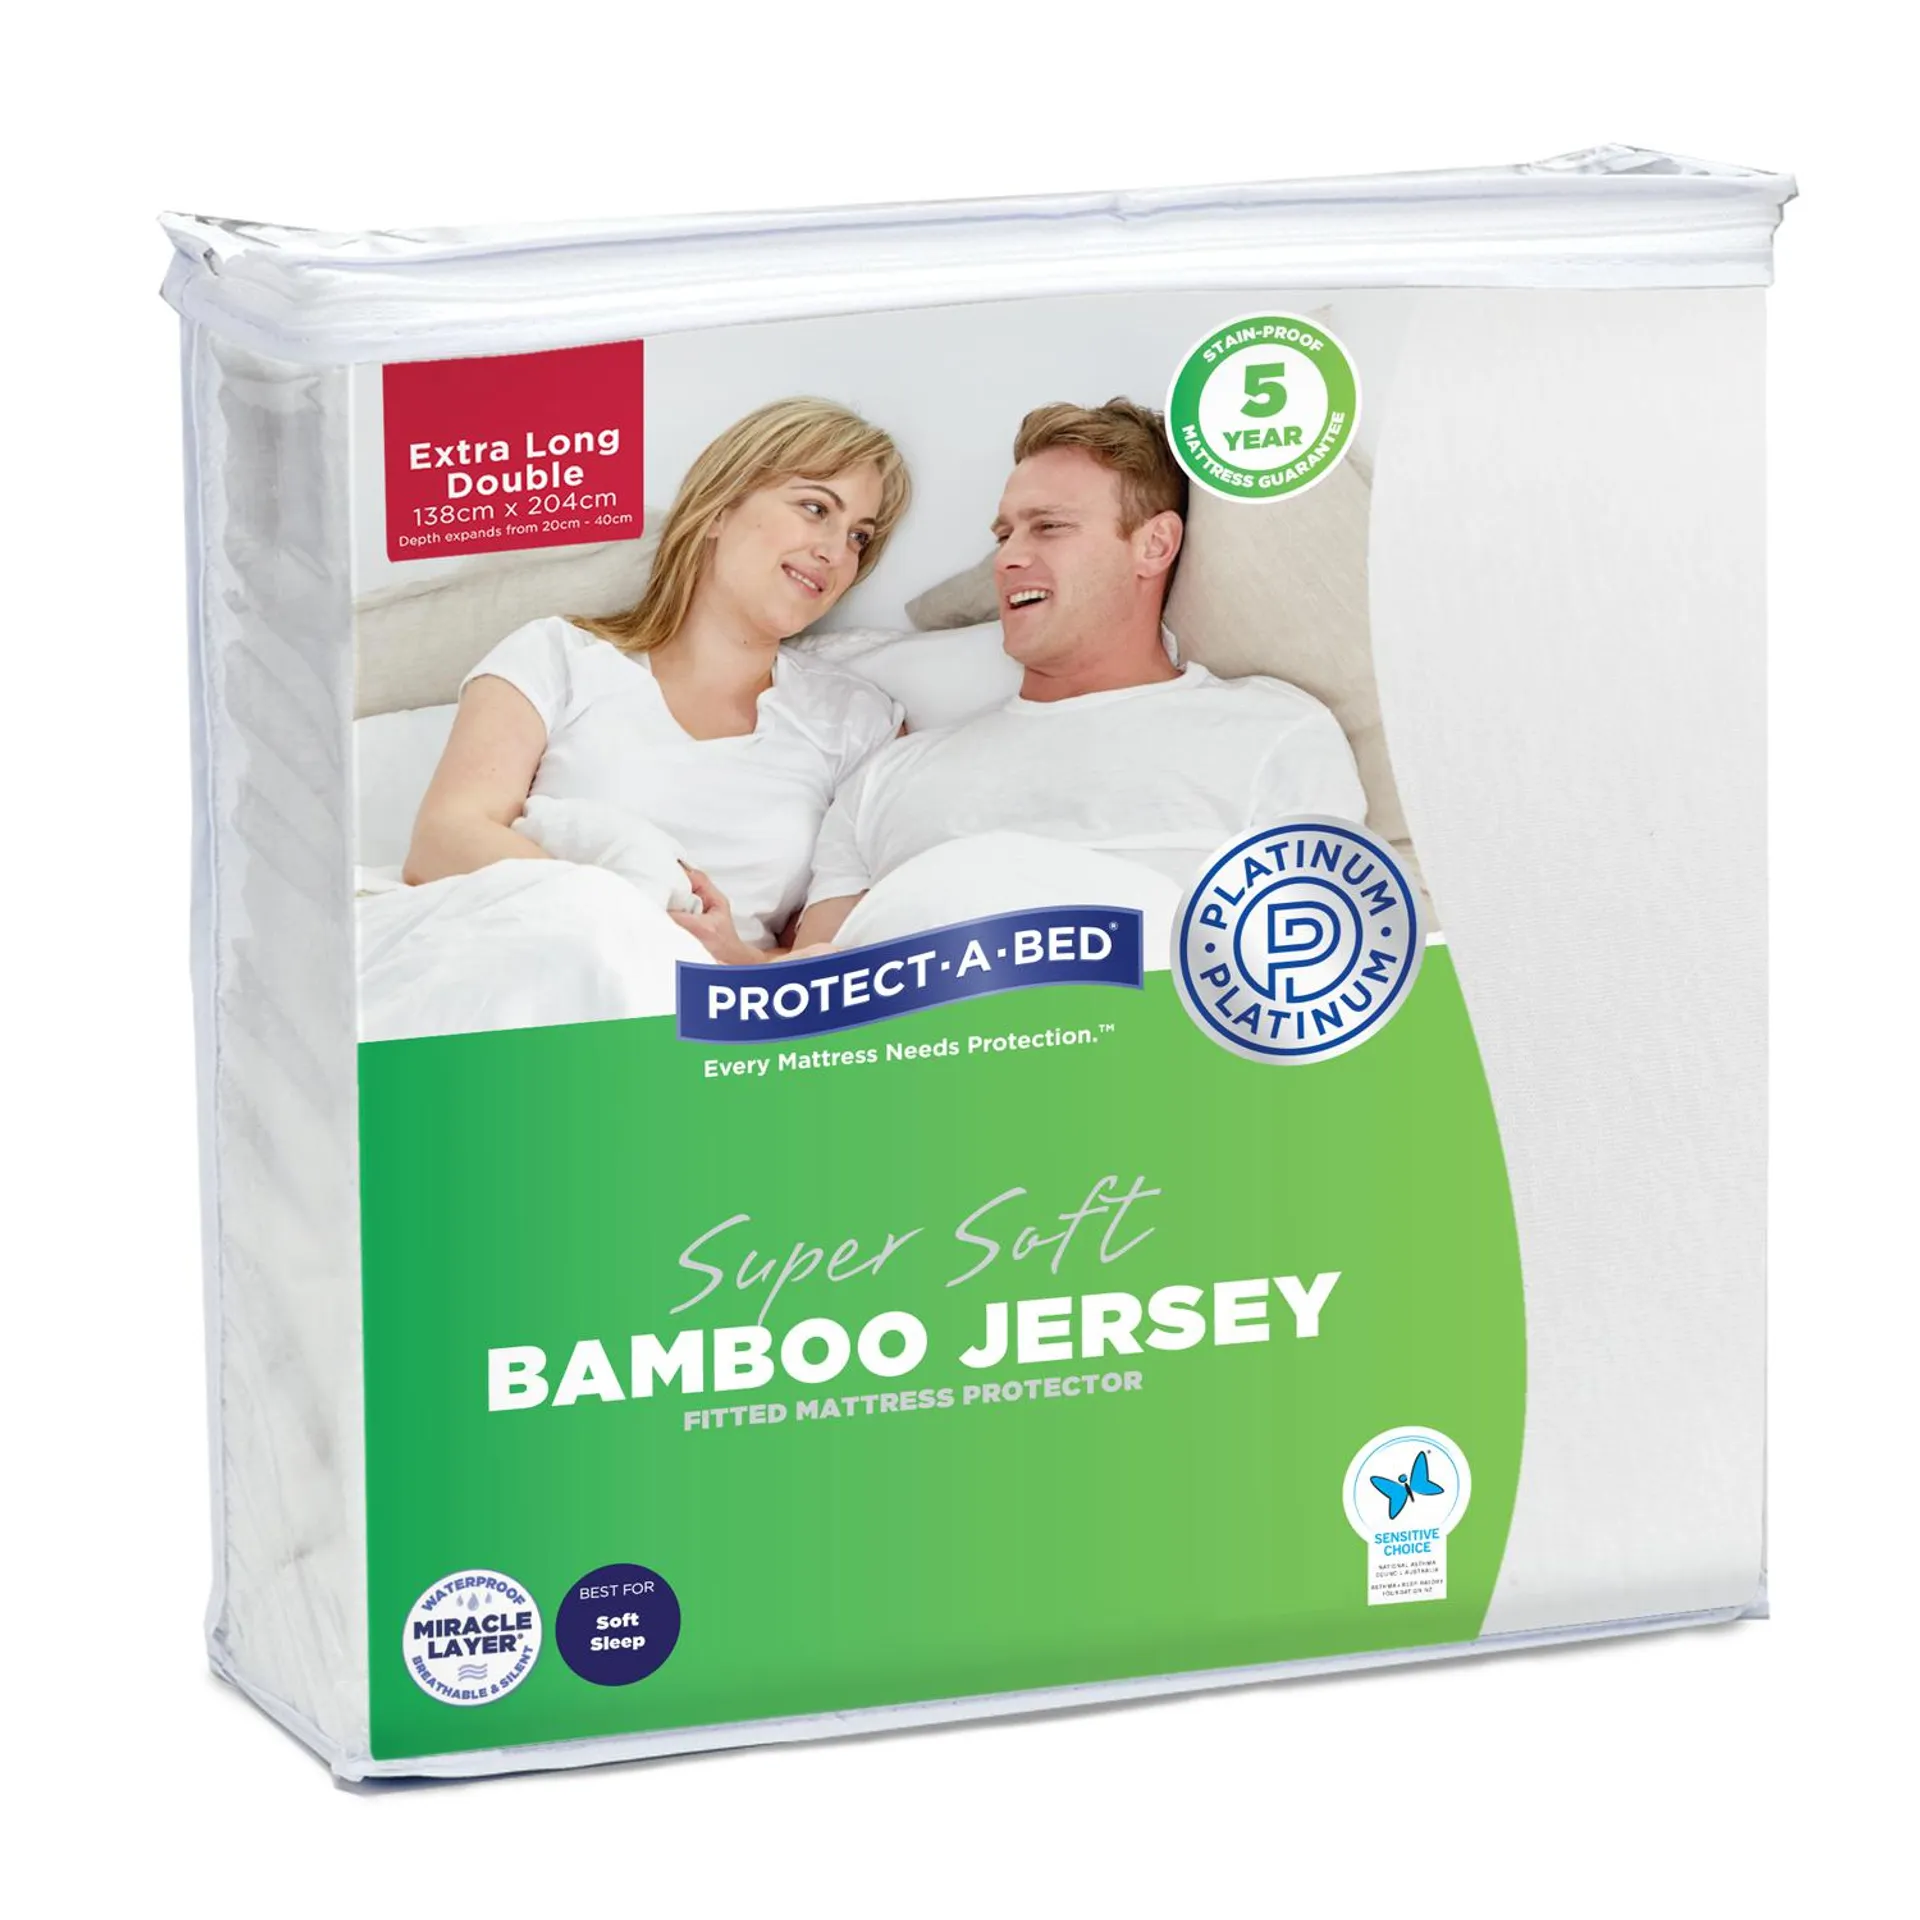 Protect-A-Bed Bamboo Waterproof Mattress Protector long Double